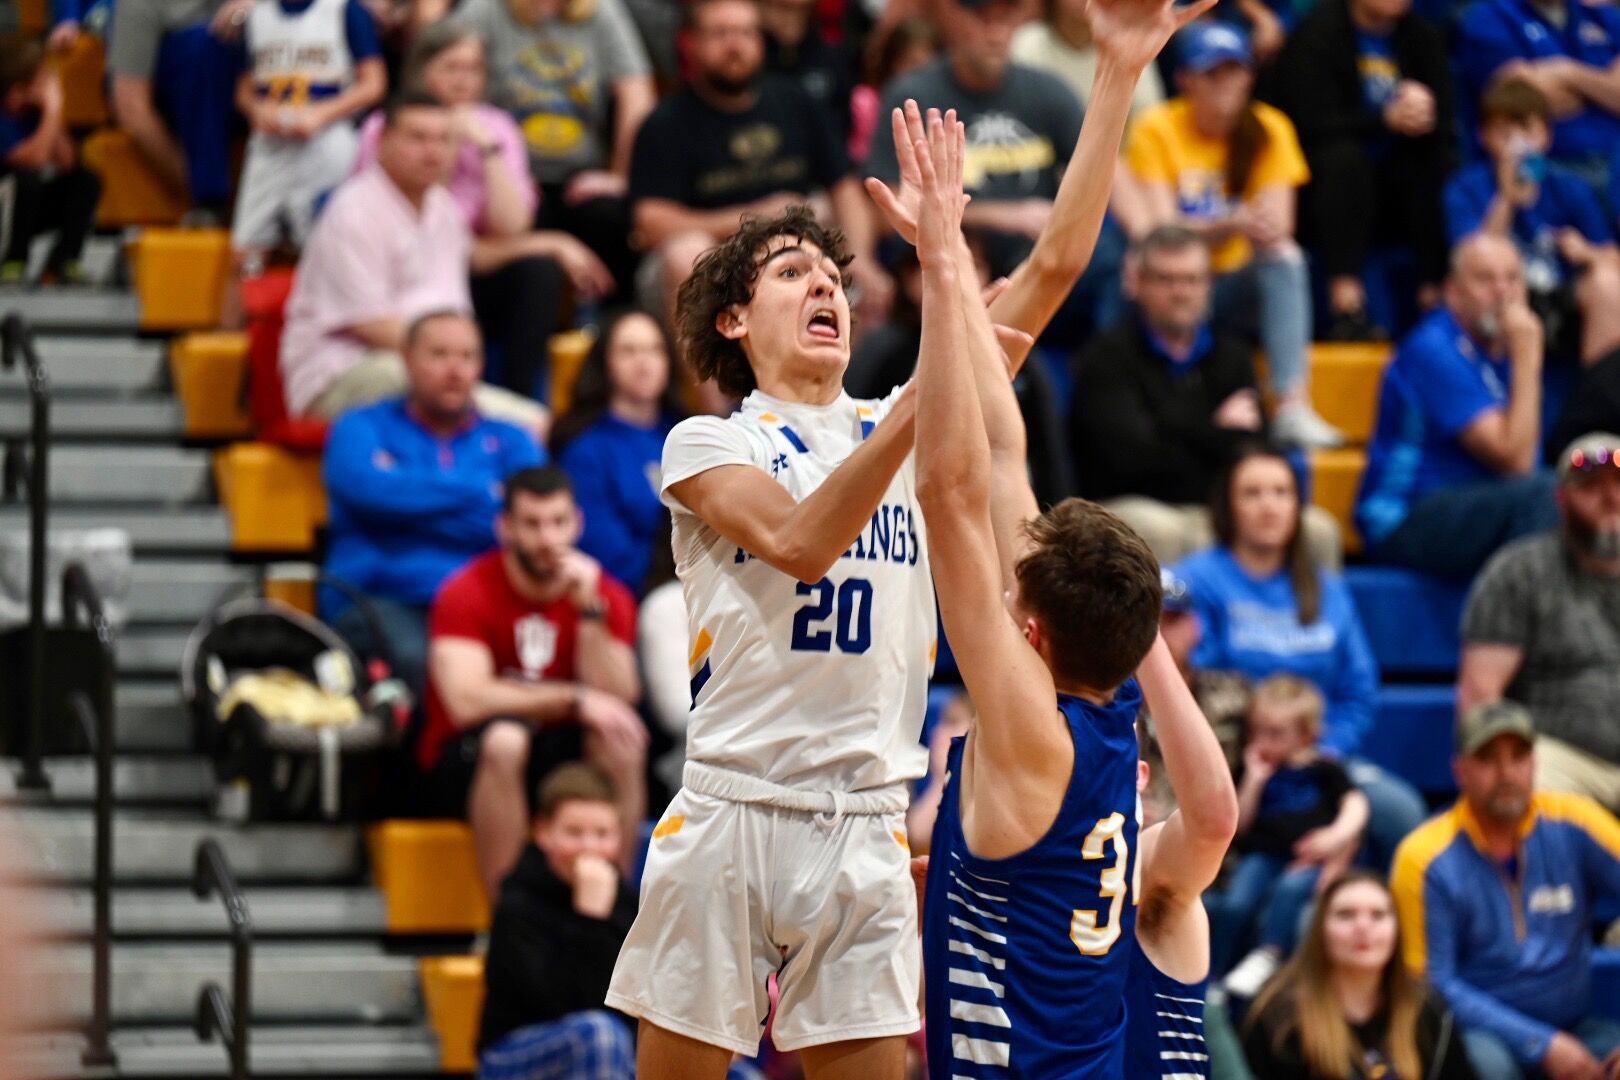 New Washington Boys’ Basketball Faces Challenges After Winning Sectional Title